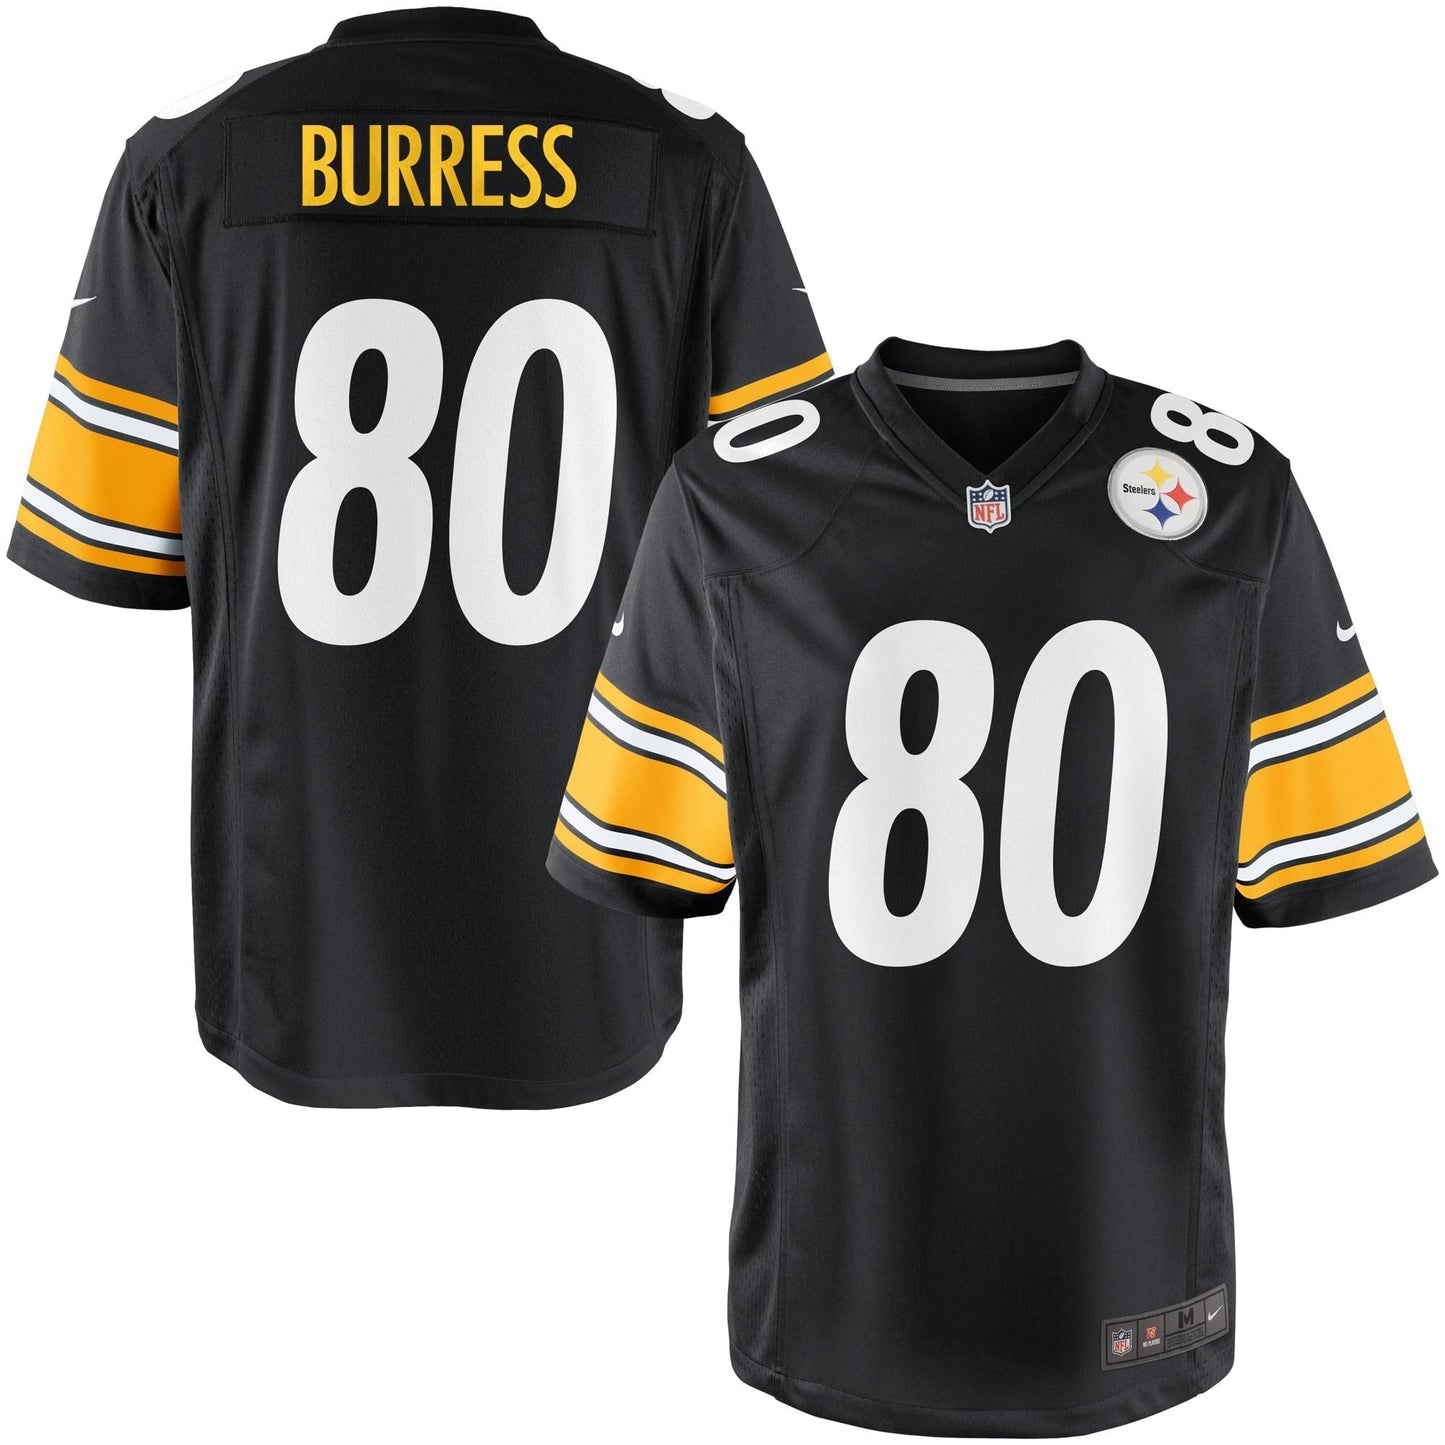 Nike Youth Pittsburgh Steelers Plaxico Burress Team Color Game Jersey